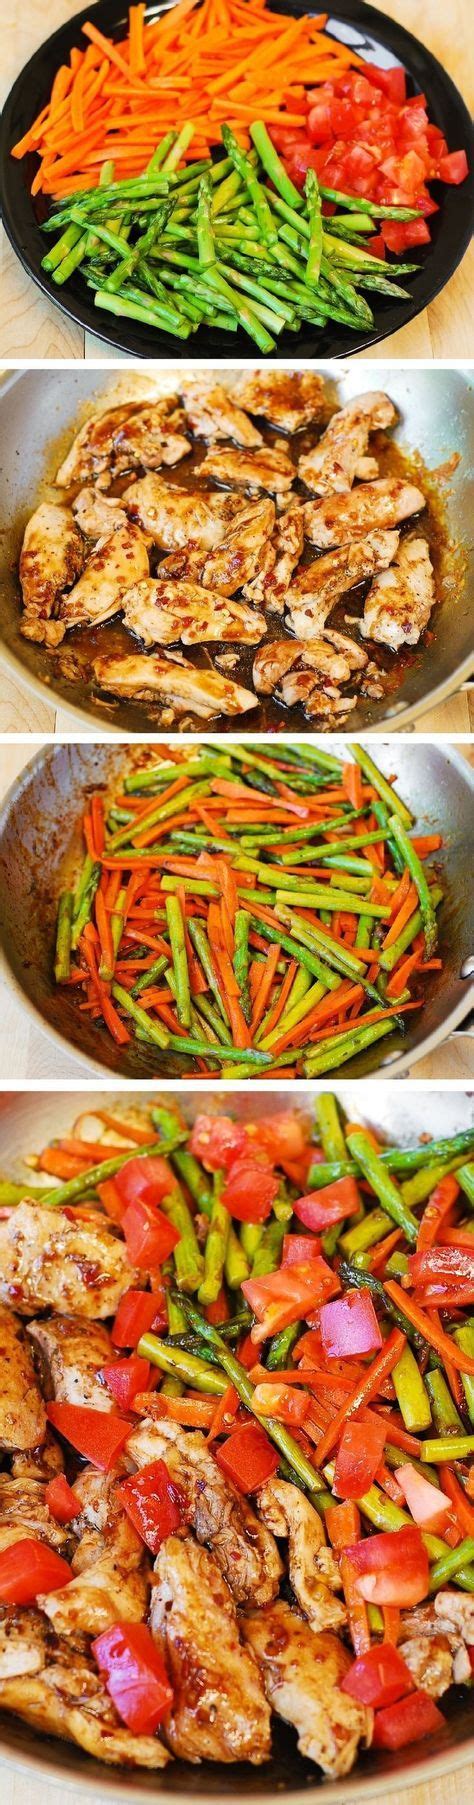 All you have to do is puree the ingredients, chill the mixture for 2 hours, and voila! 30-Minute Meals for Quick, Healthy Dinner Ideas | Low ...